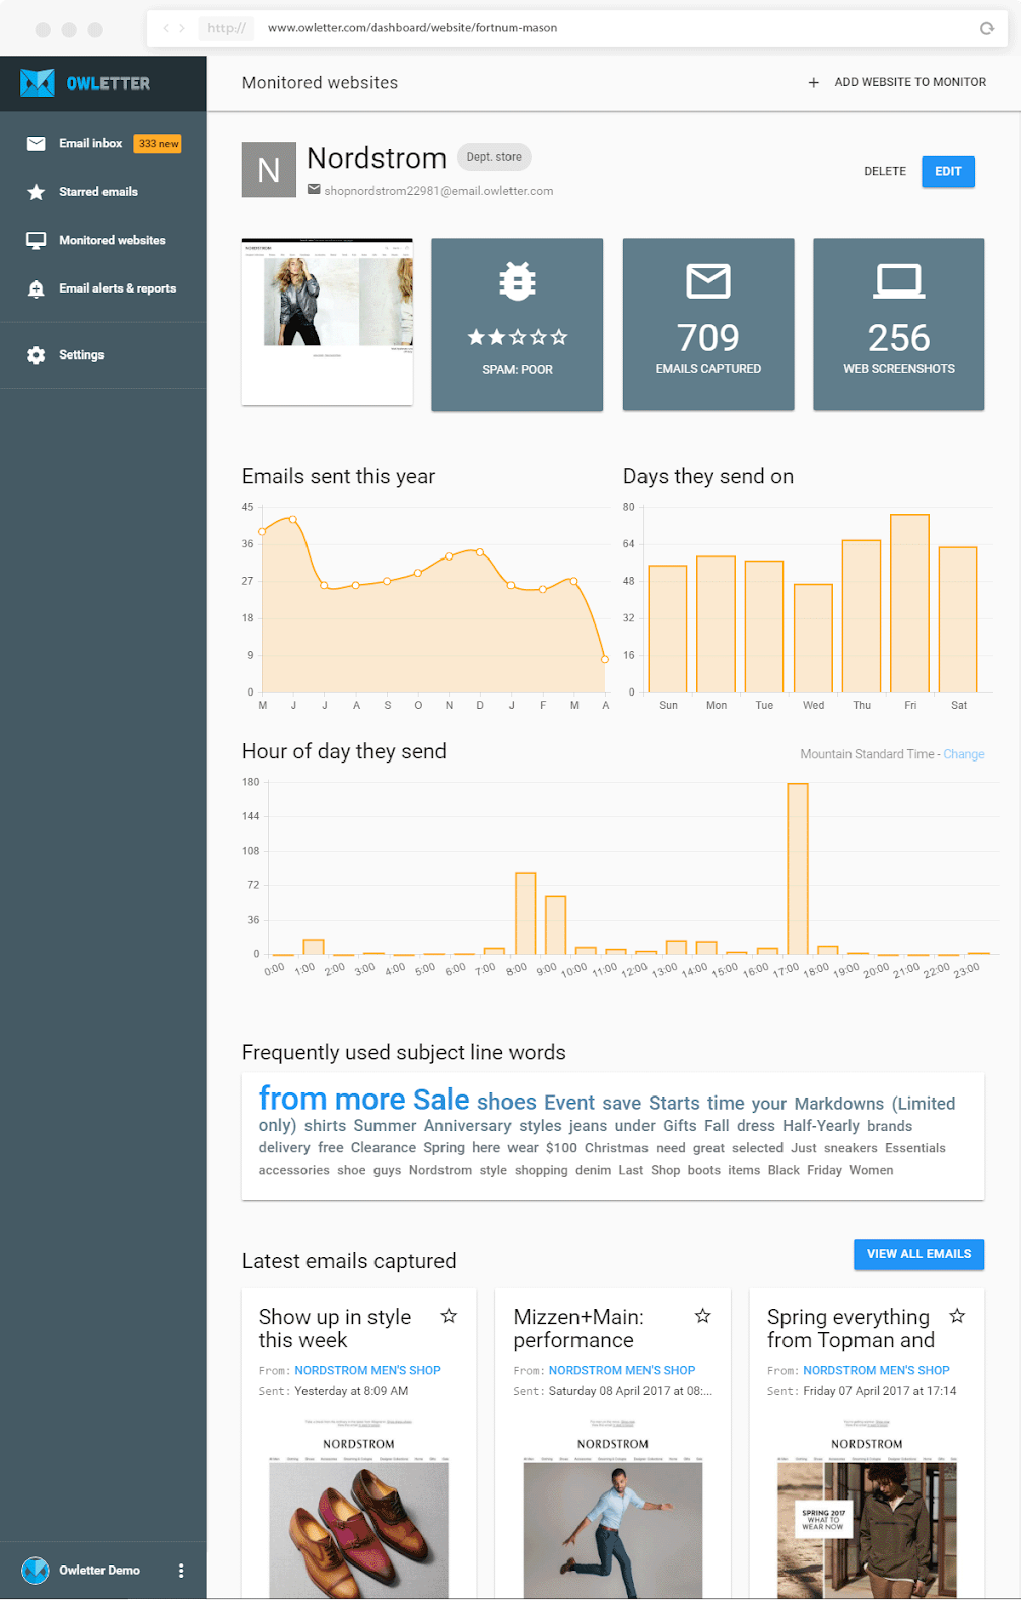 Owletter overview dashboard for Nordstrom